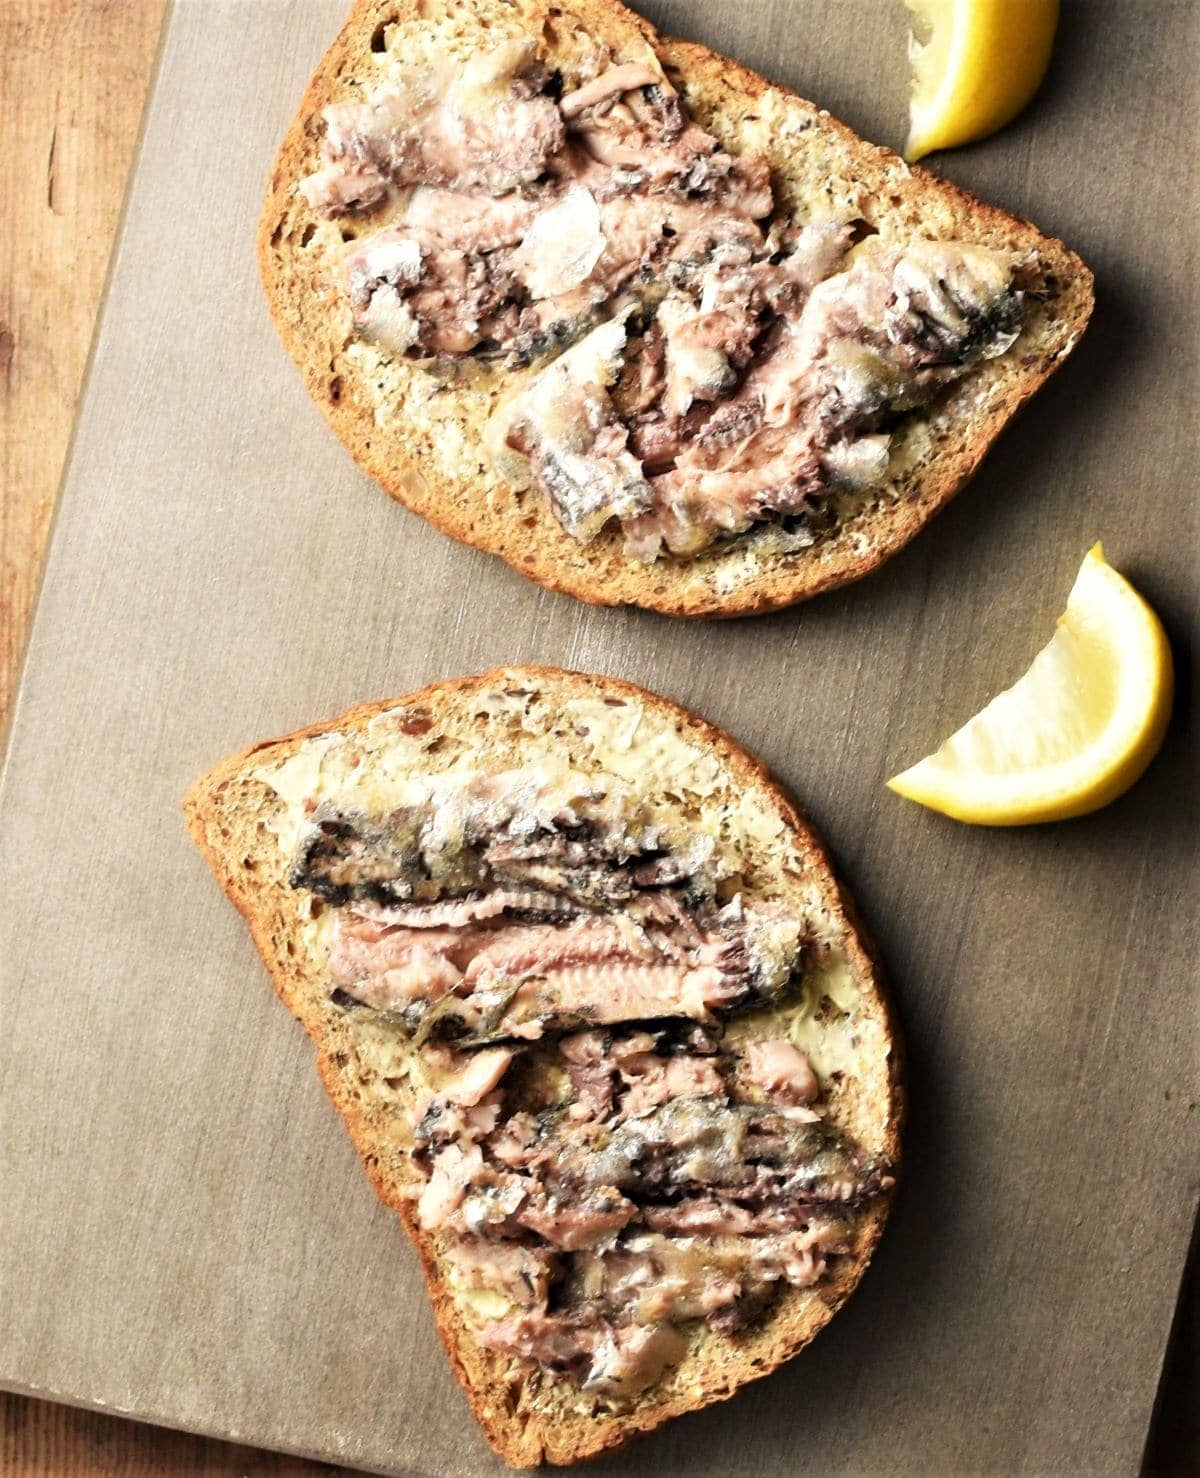 2 slices of bread with smashed sardines on top and lemon wedges in background.